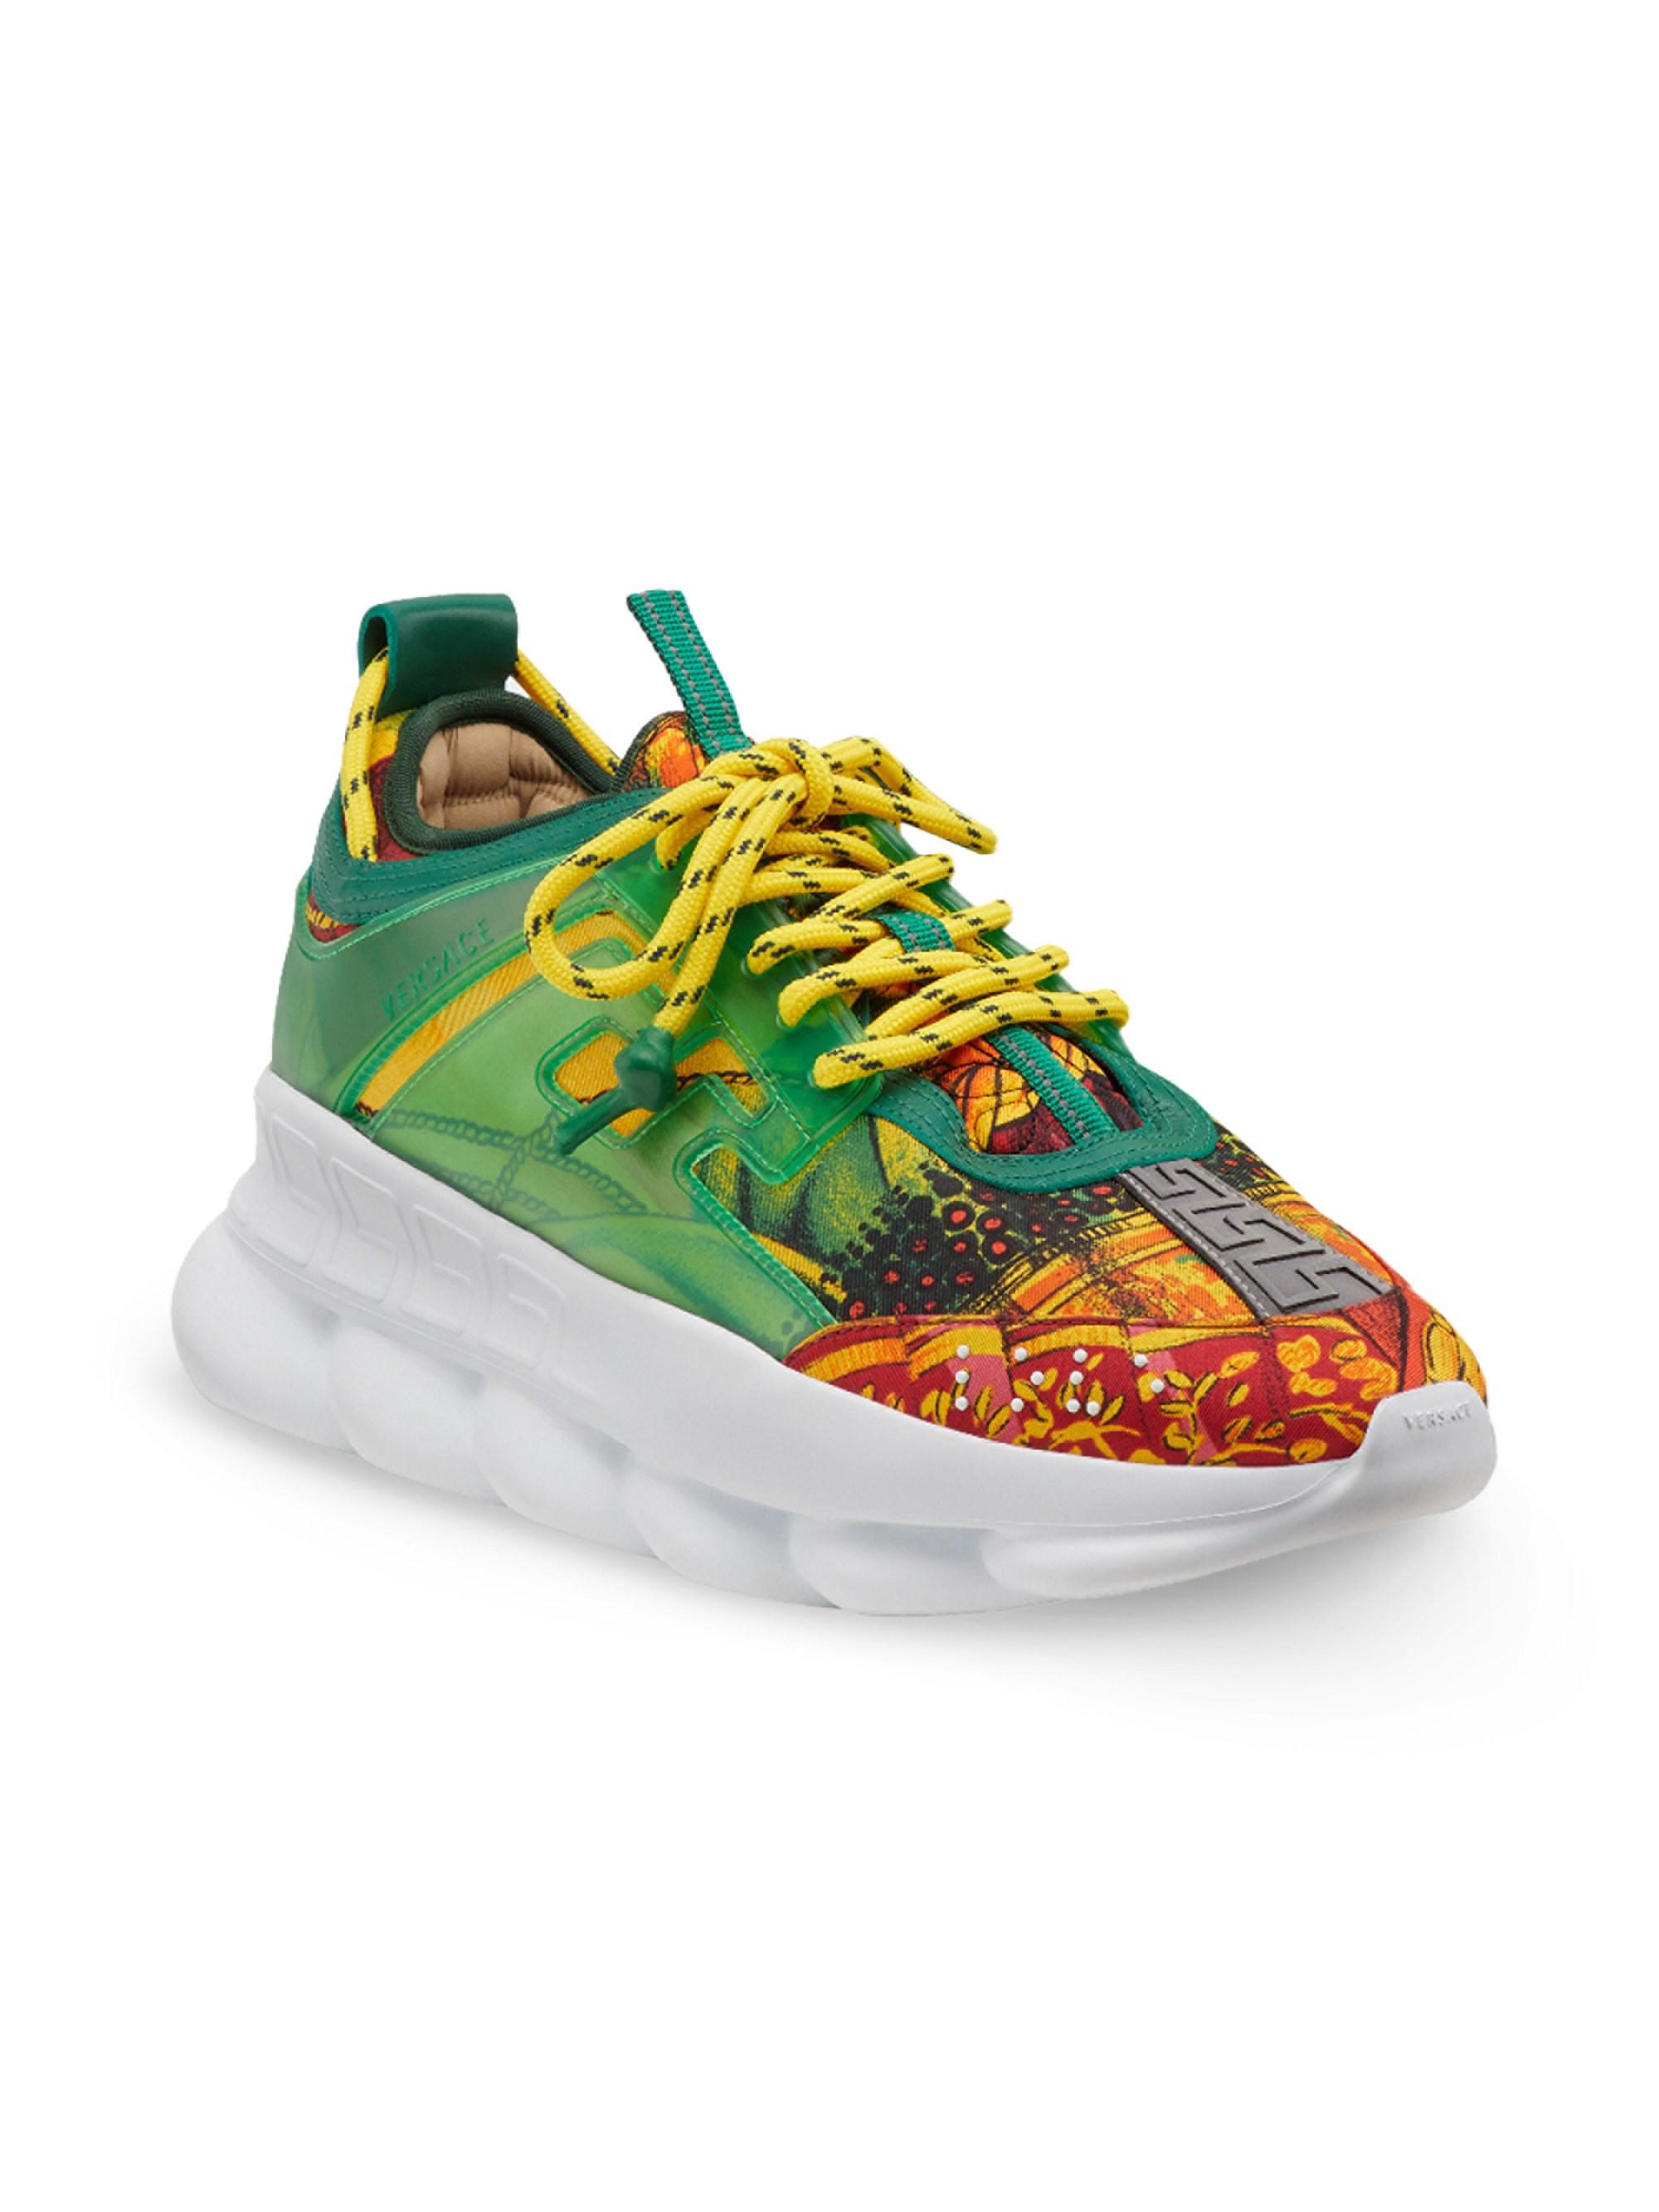 2Chainz x Versace Chain Reaction Sneakers in Green/Brown  Trending fashion  shoes, Versace chain, Mens accessories fashion